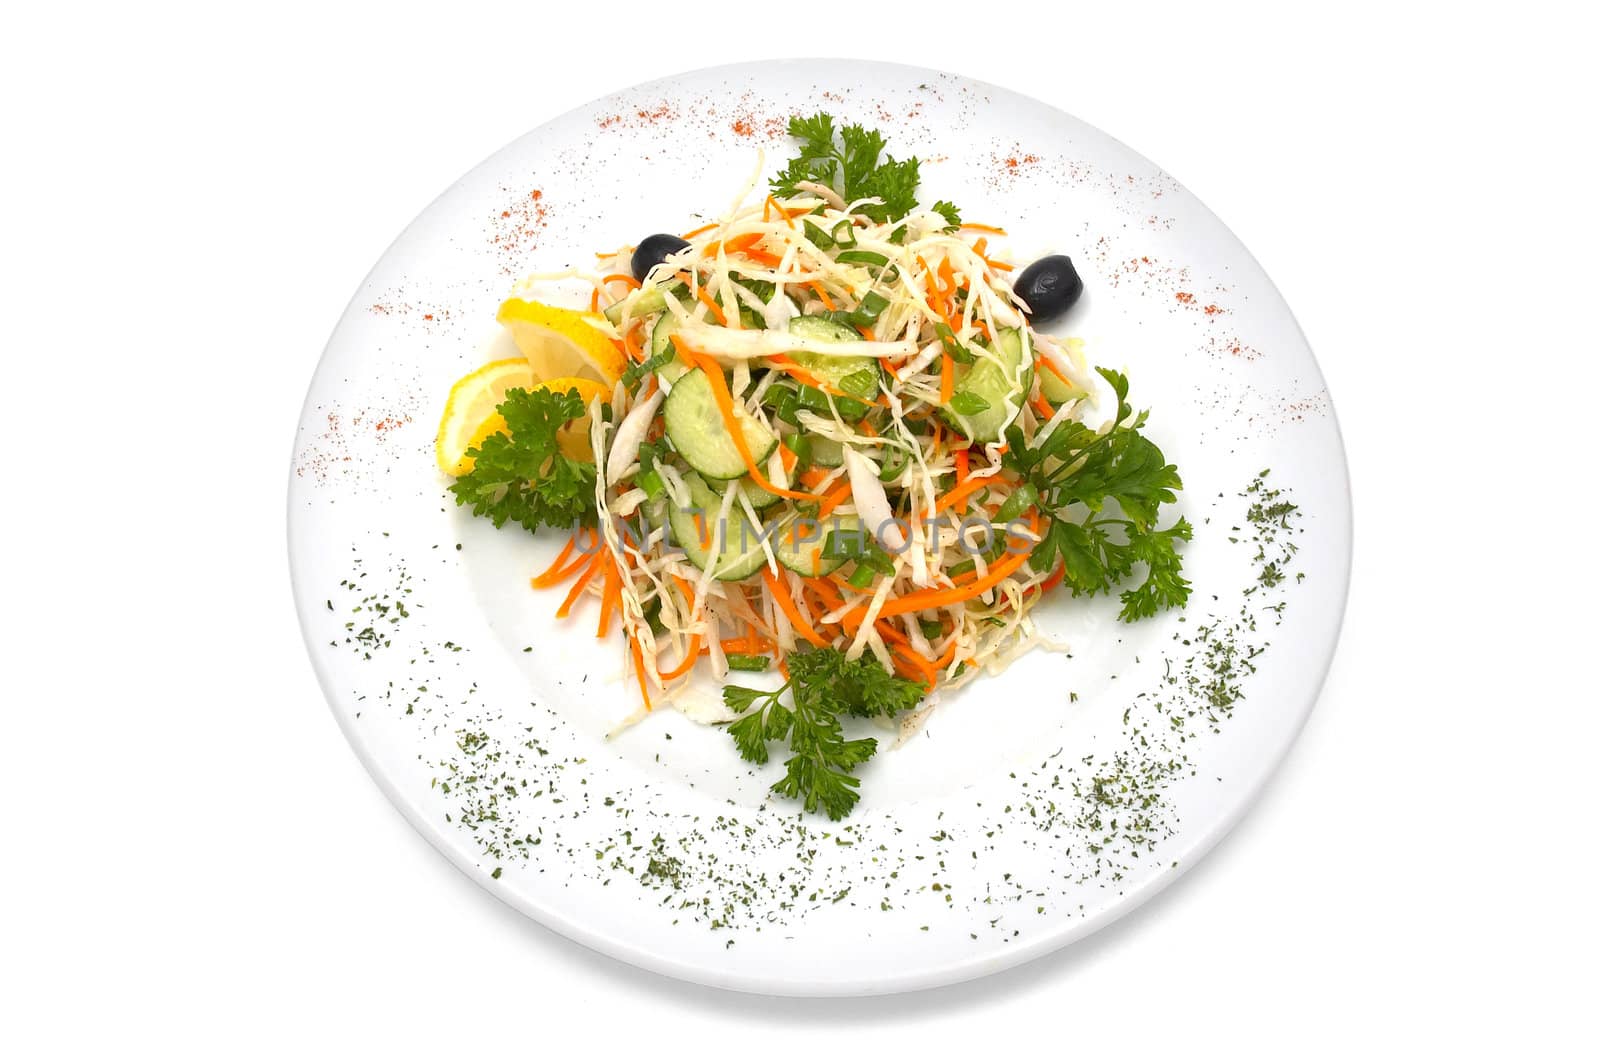 Salad made with fresh cabbage, cucumber, carrot, parsley. Black olives and slice of lemon added.